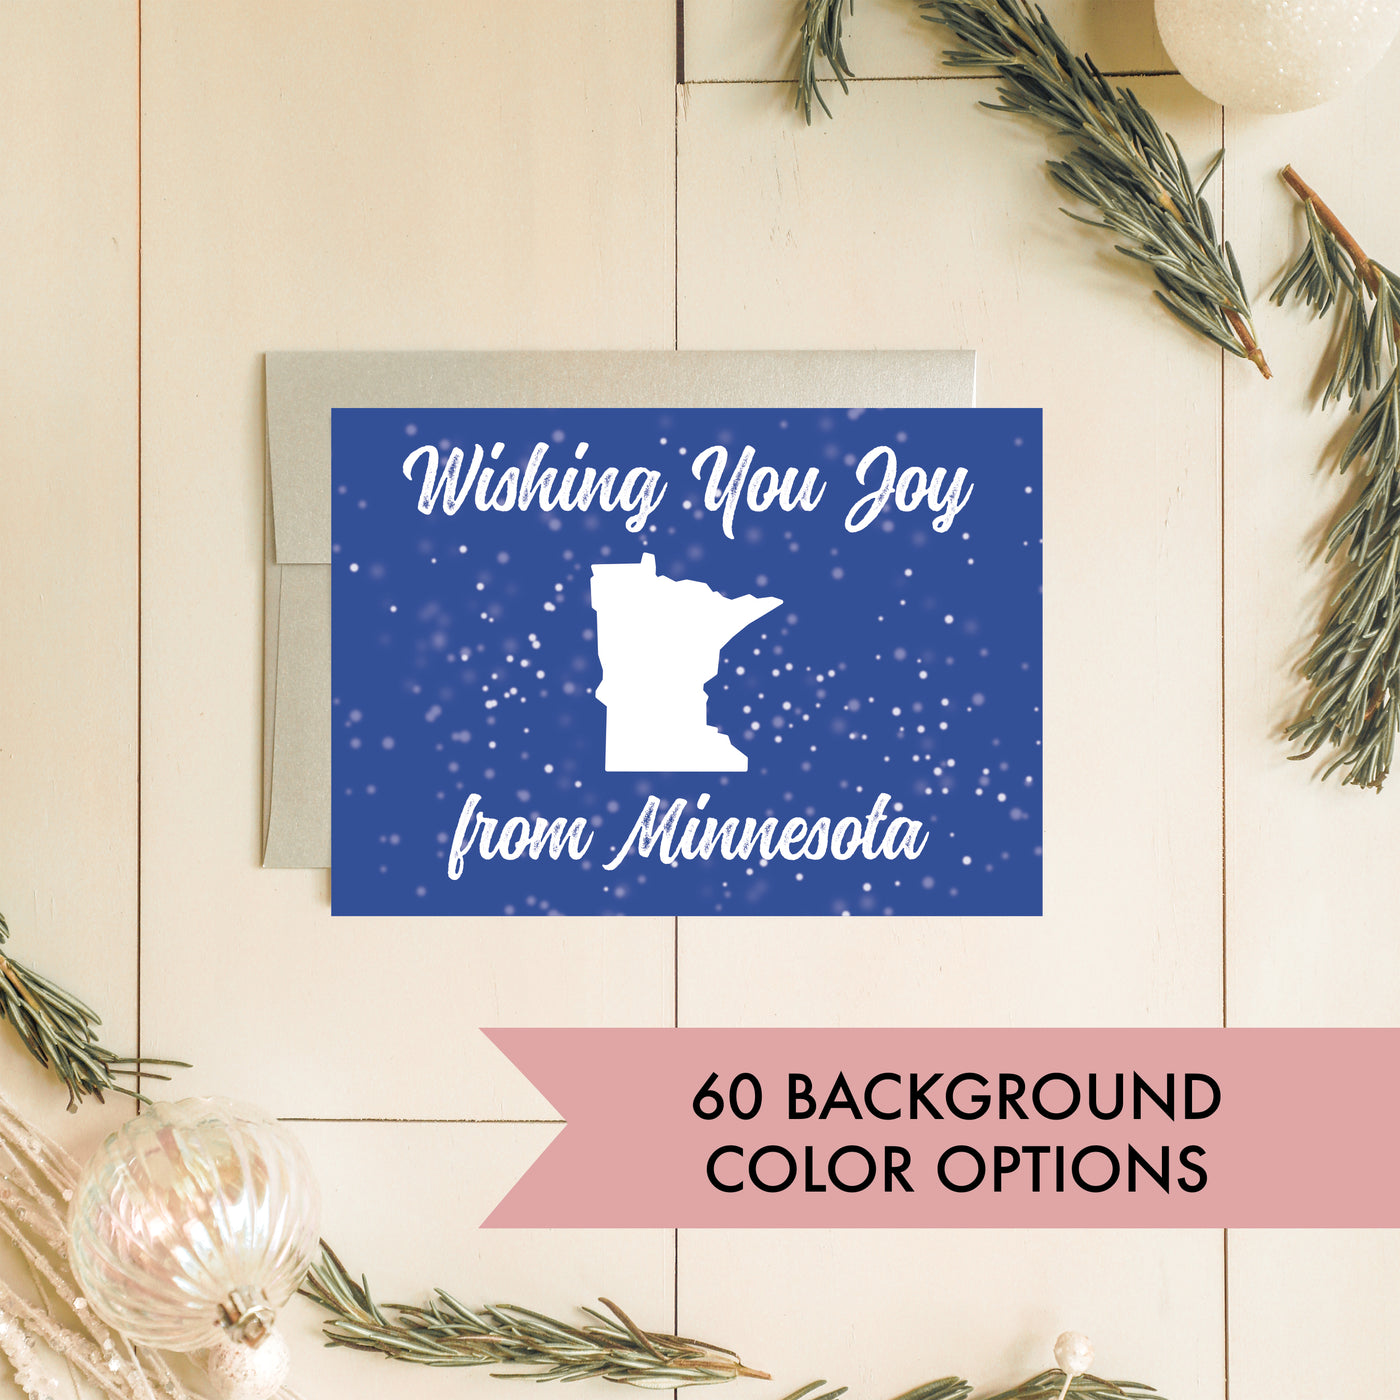 Minnesota Holiday Card | Noticeably Noted